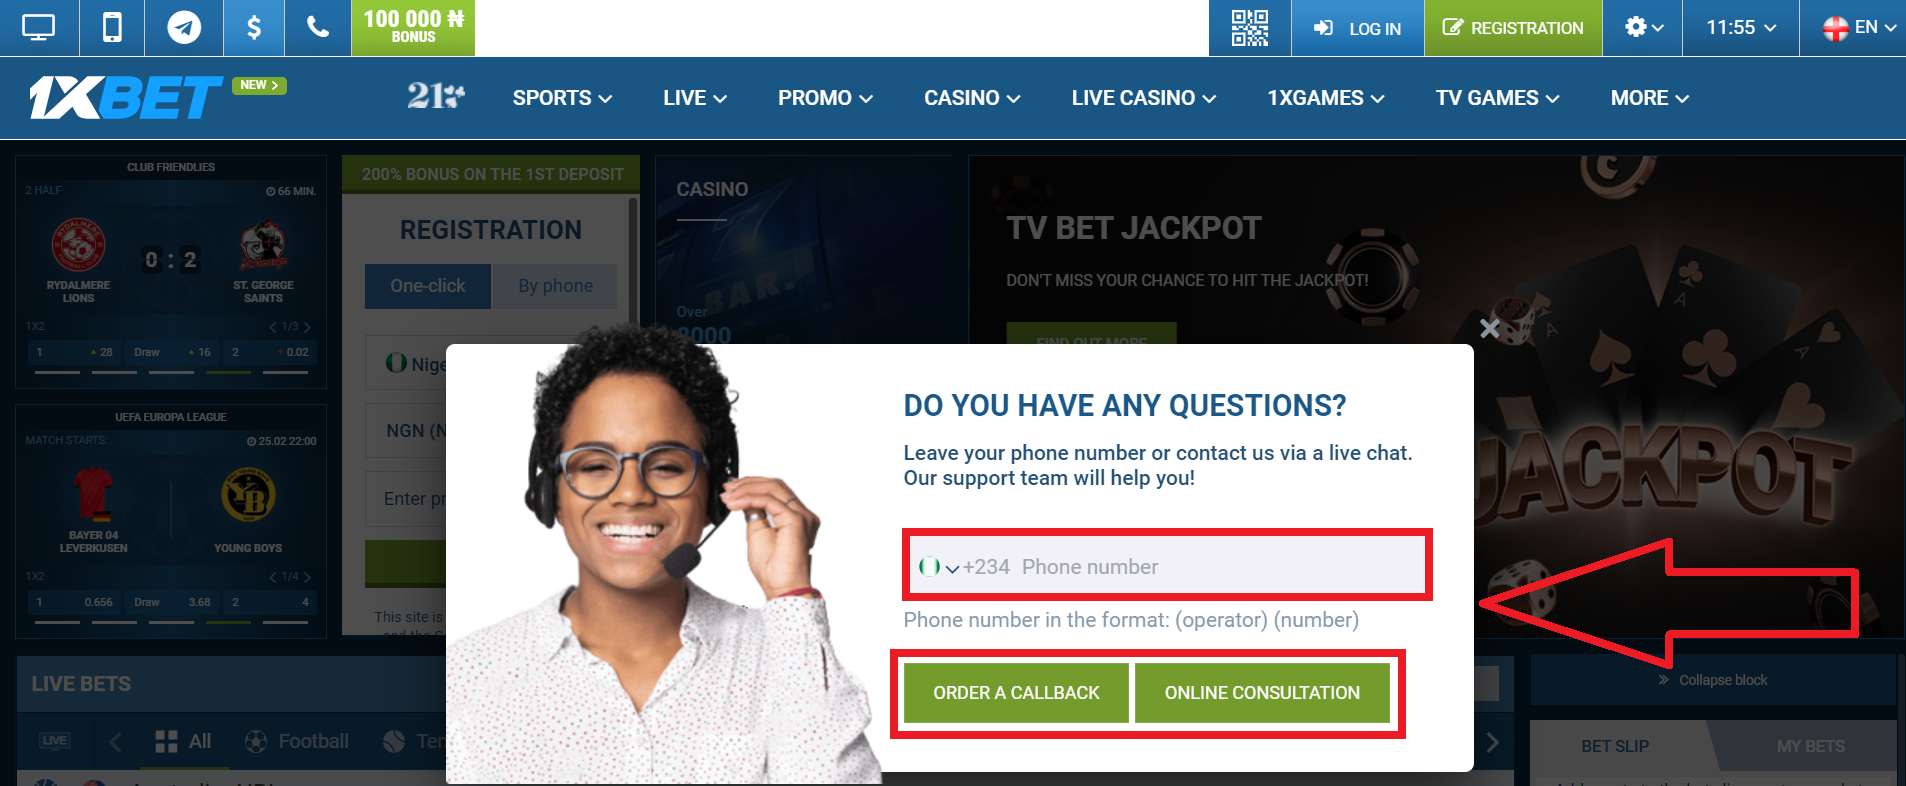 How to sign up to 1xBet and receive bonuses